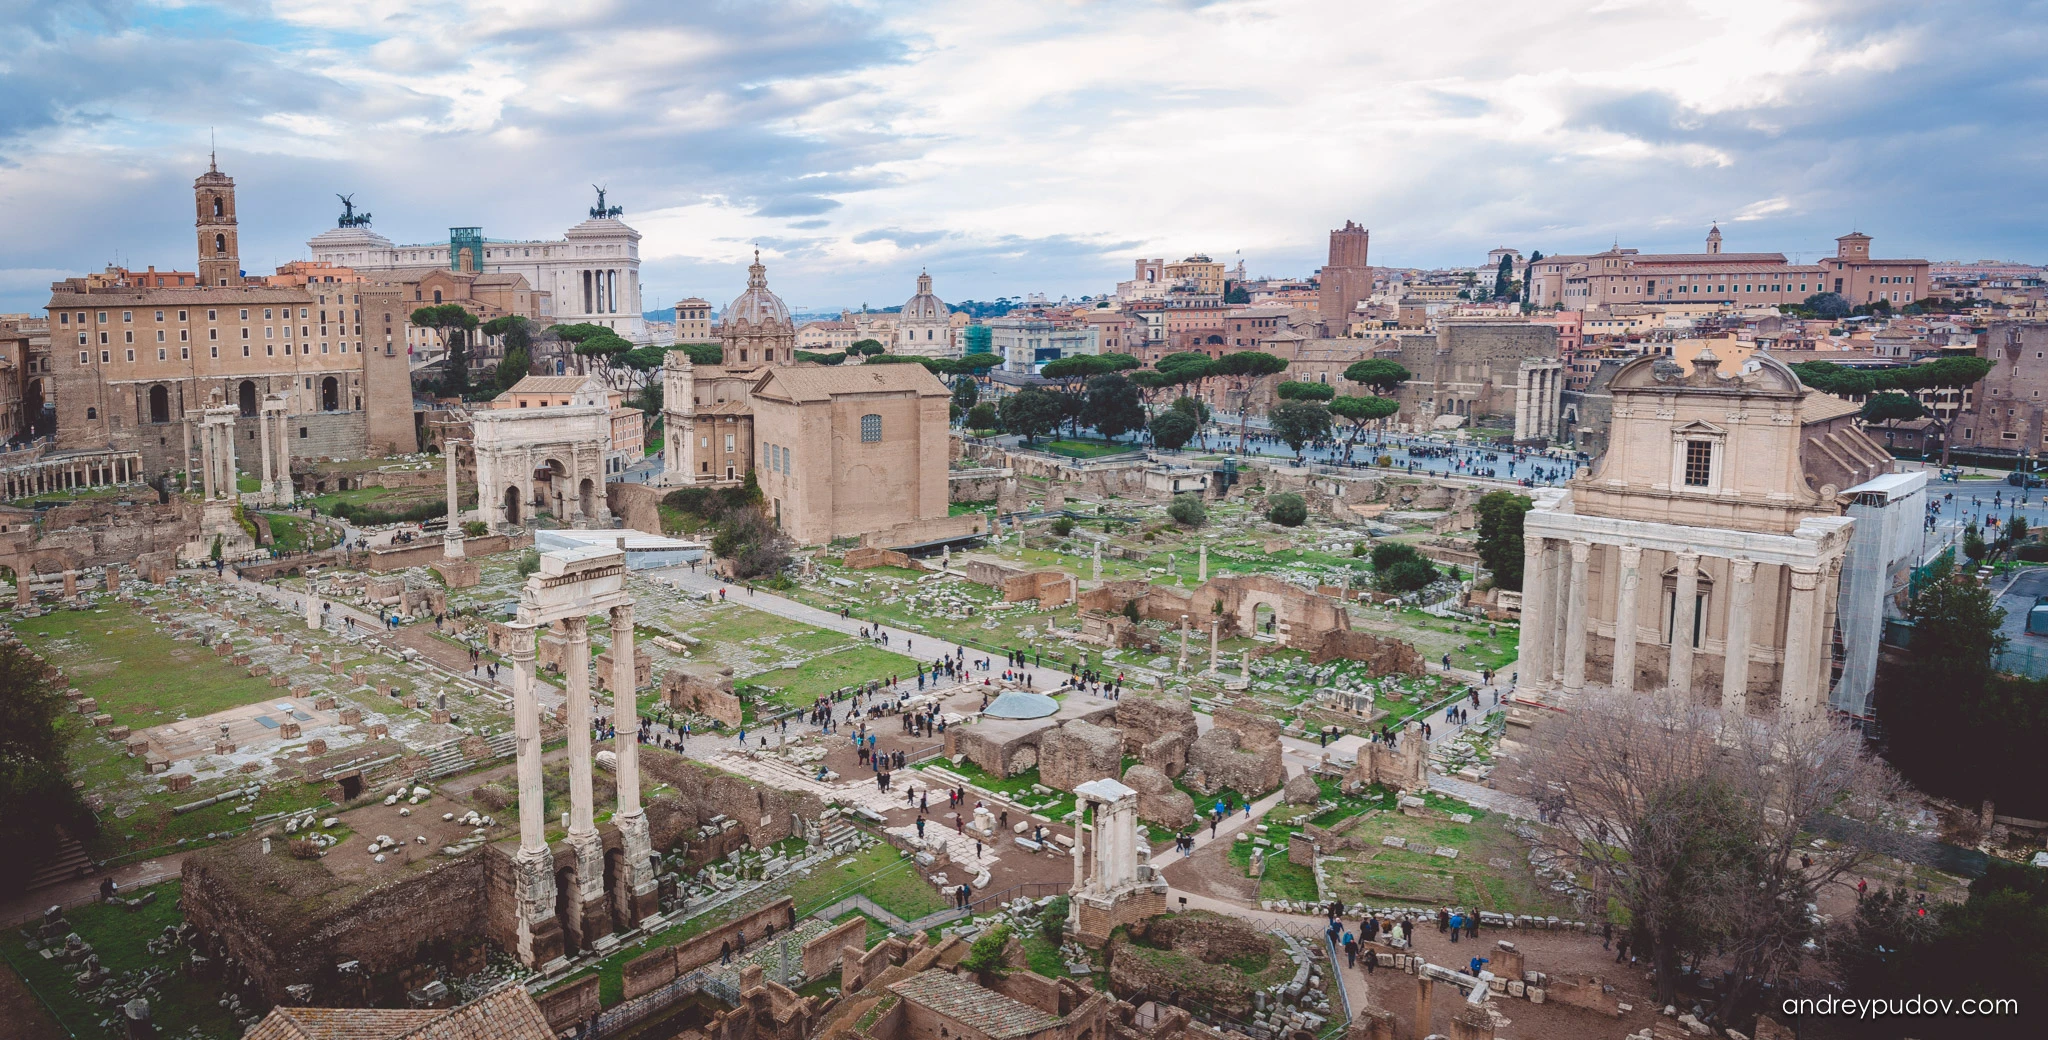 Roman Forum

The Roman Forum, also known by its Latin name Forum Romanum, is a rectangular forum (plaza) surrounded by the ruins of several important ancient government buildings at the center of the city of Rome. Citizens of the ancient city referred to this space, originally a marketplace, as the Forum Magnum, or simply the Forum.

For centuries the Forum was the center of day-to-day life in Rome: the site of triumphal processions and elections; the venue for public speeches, criminal trials, and gladiatorial matches; and the nucleus of commercial affairs. Here statues and monuments commemorated the city's great men. The teeming heart of ancient Rome, it has been called the most celebrated meeting place in the world, and in all history. Located in the small valley between the Palatine and Capitoline Hills, the Forum today is a sprawling ruin of architectural fragments and intermittent archaeological excavations attracting 4.5 million or more sightseers yearly.